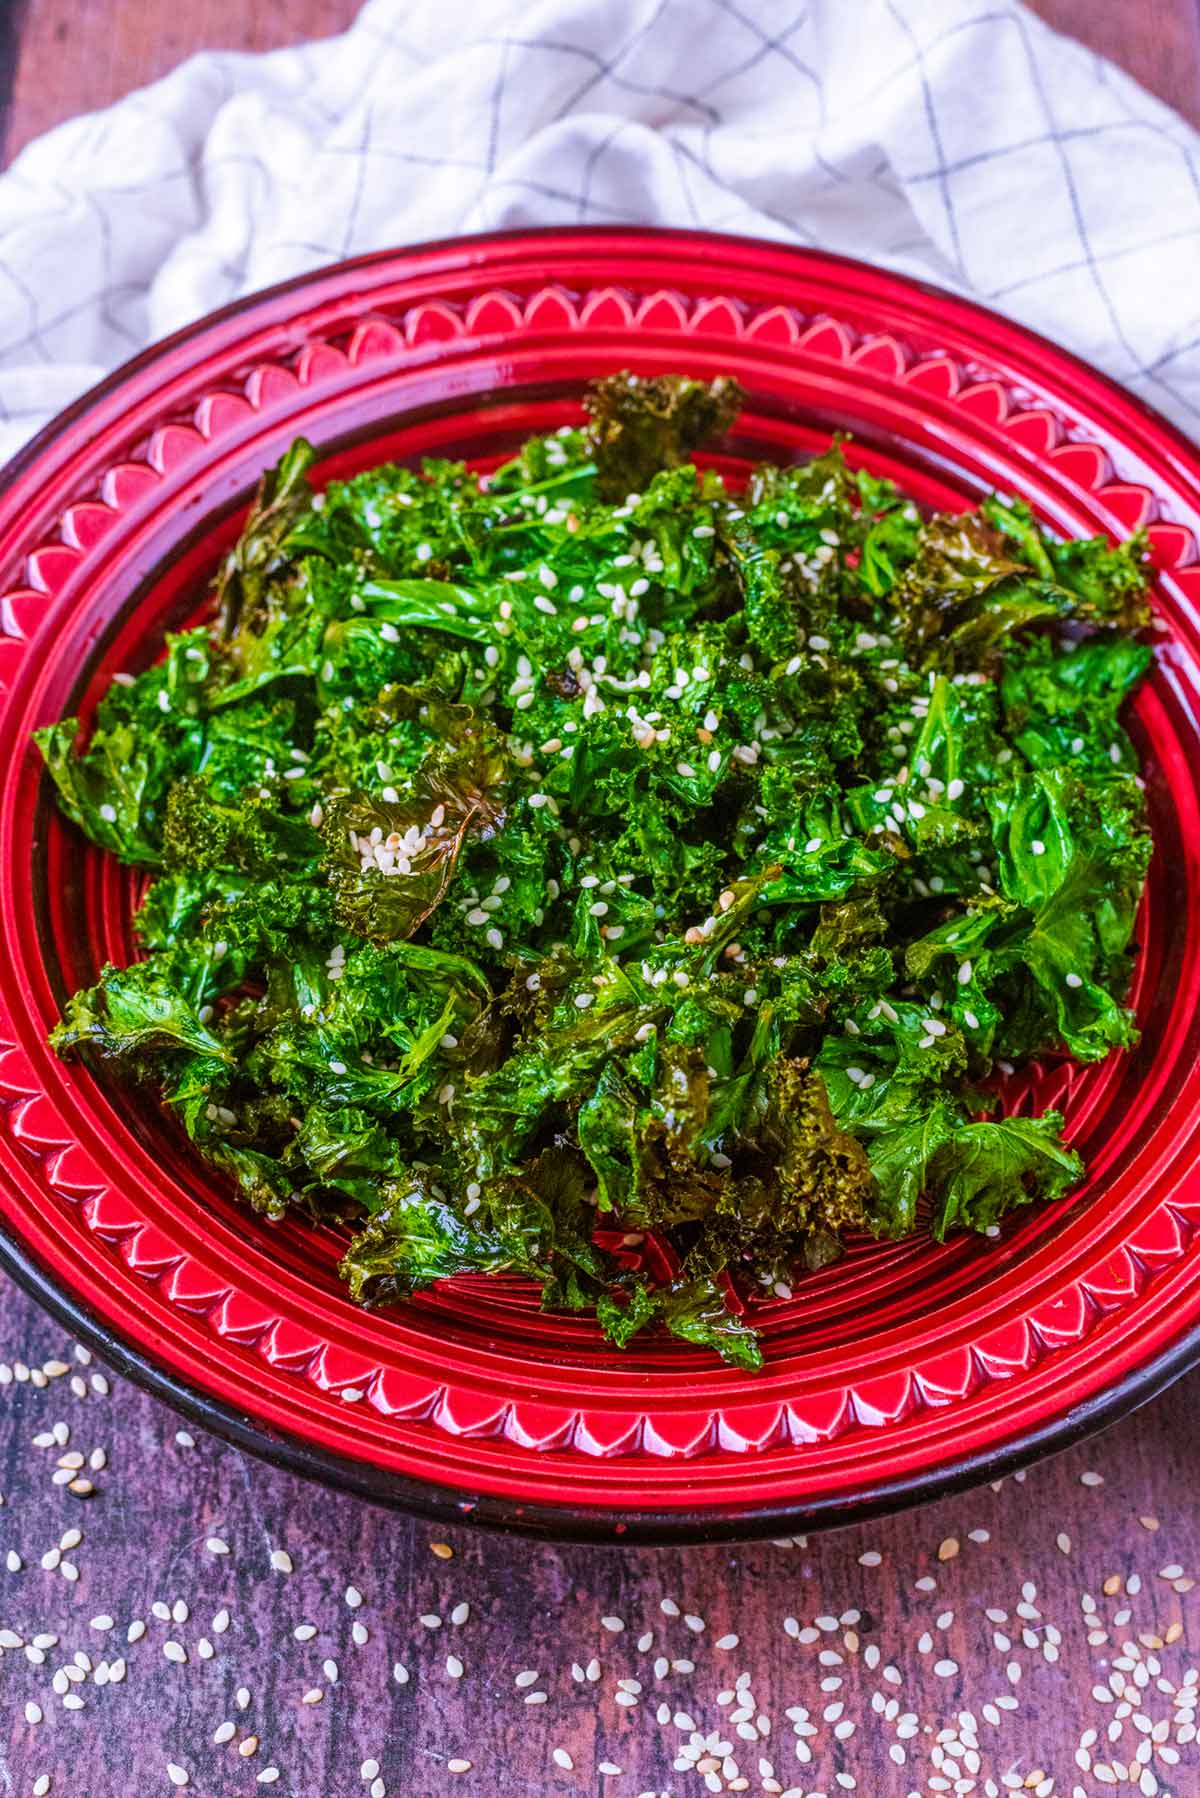 A bowl of kale in front of a towel.